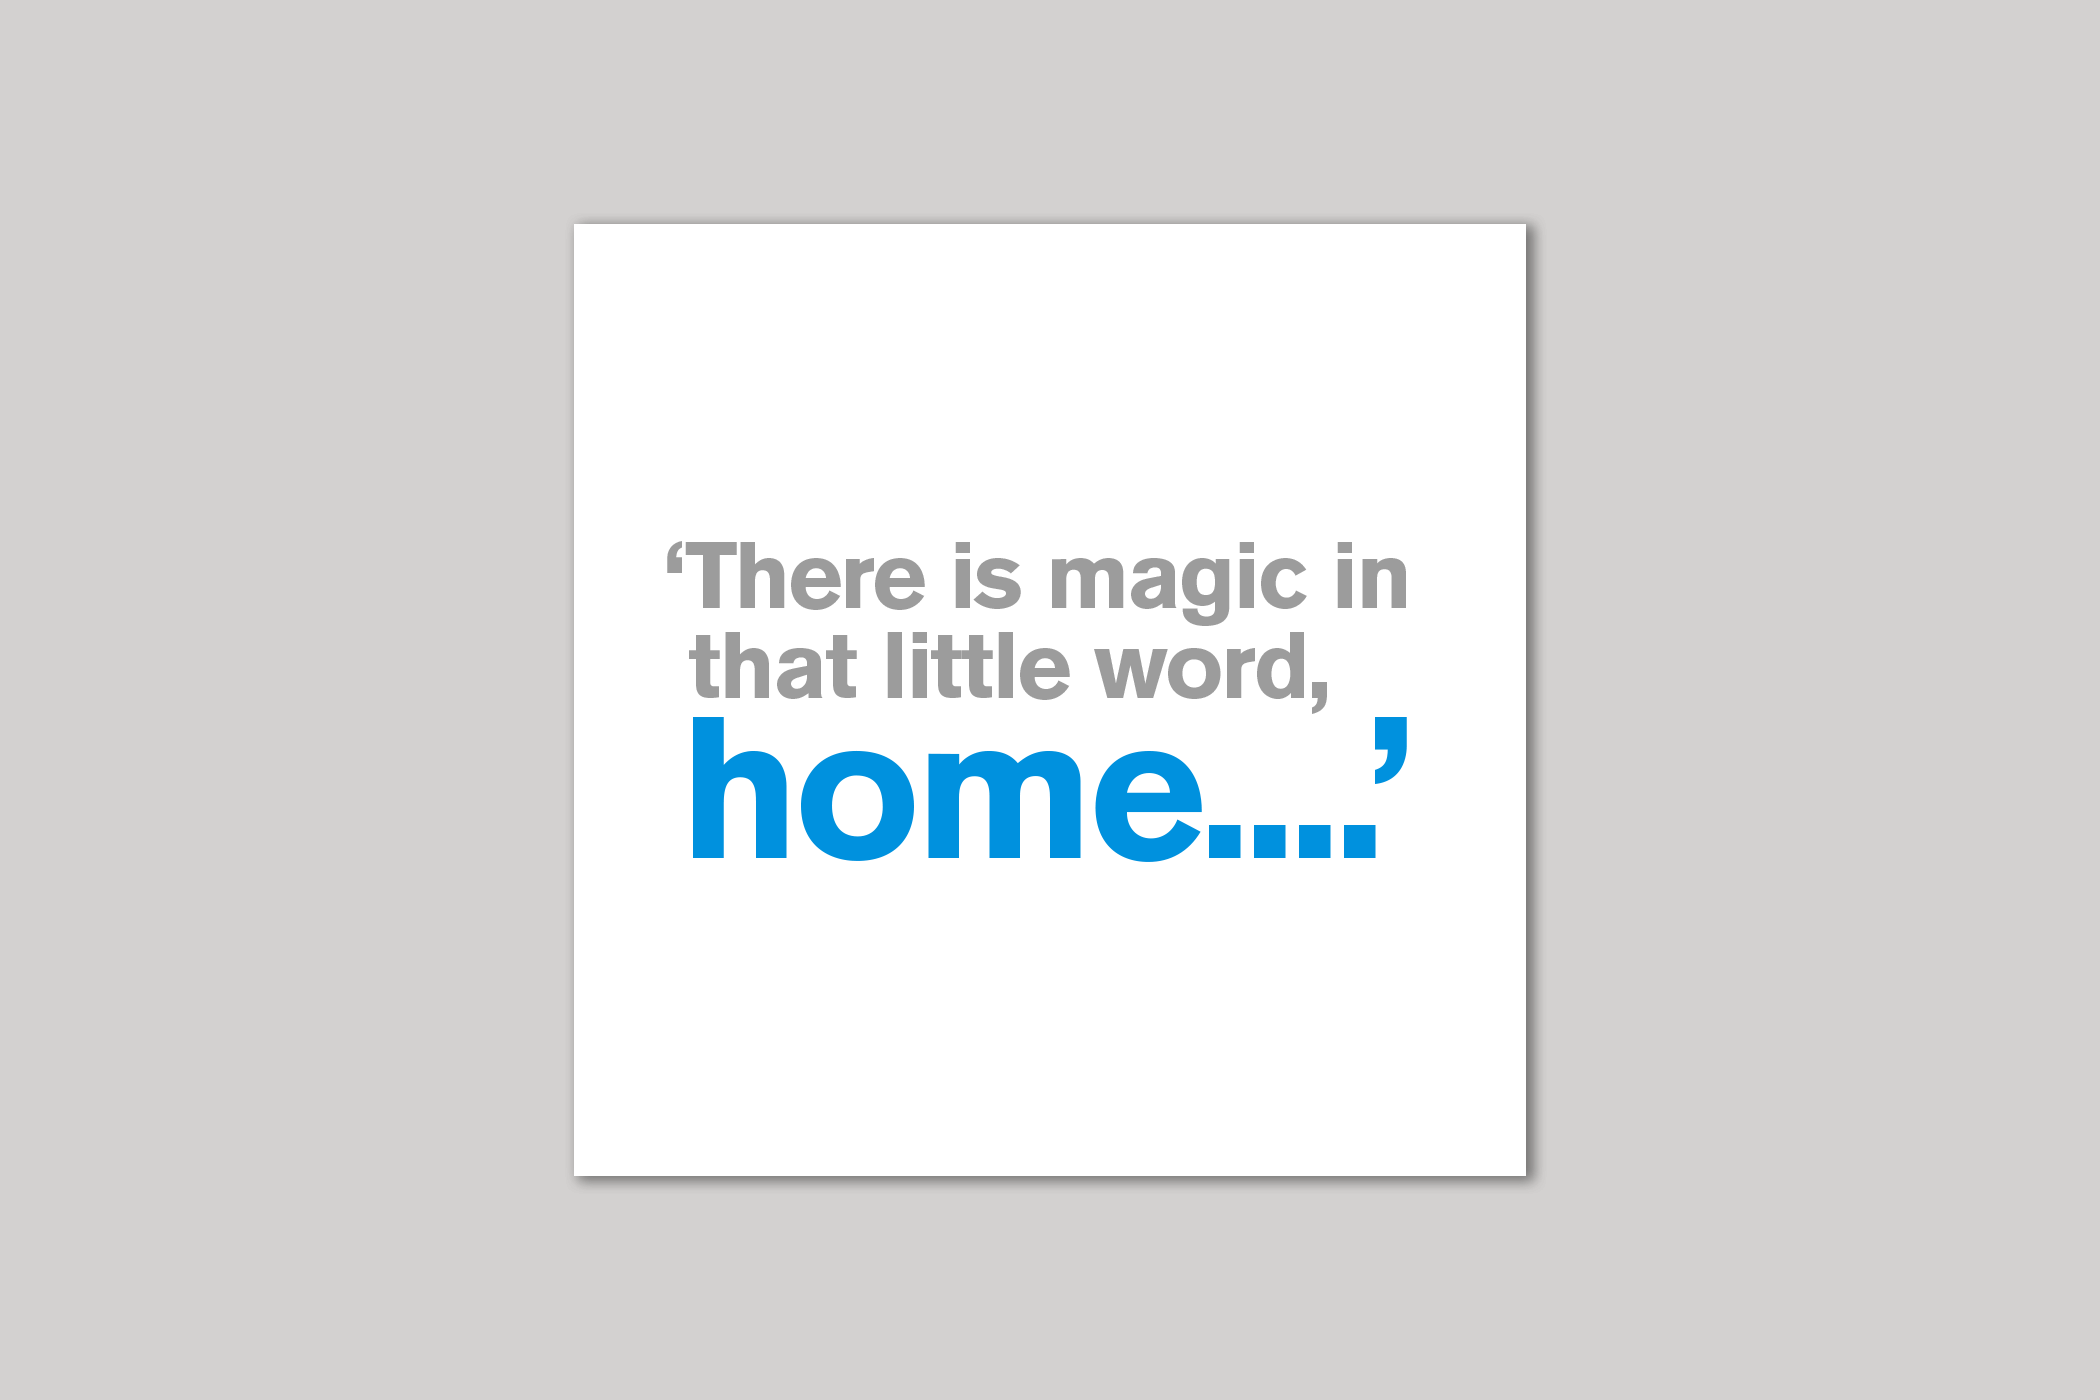 Home new home card from Lyric range of quotation cards by Icon.